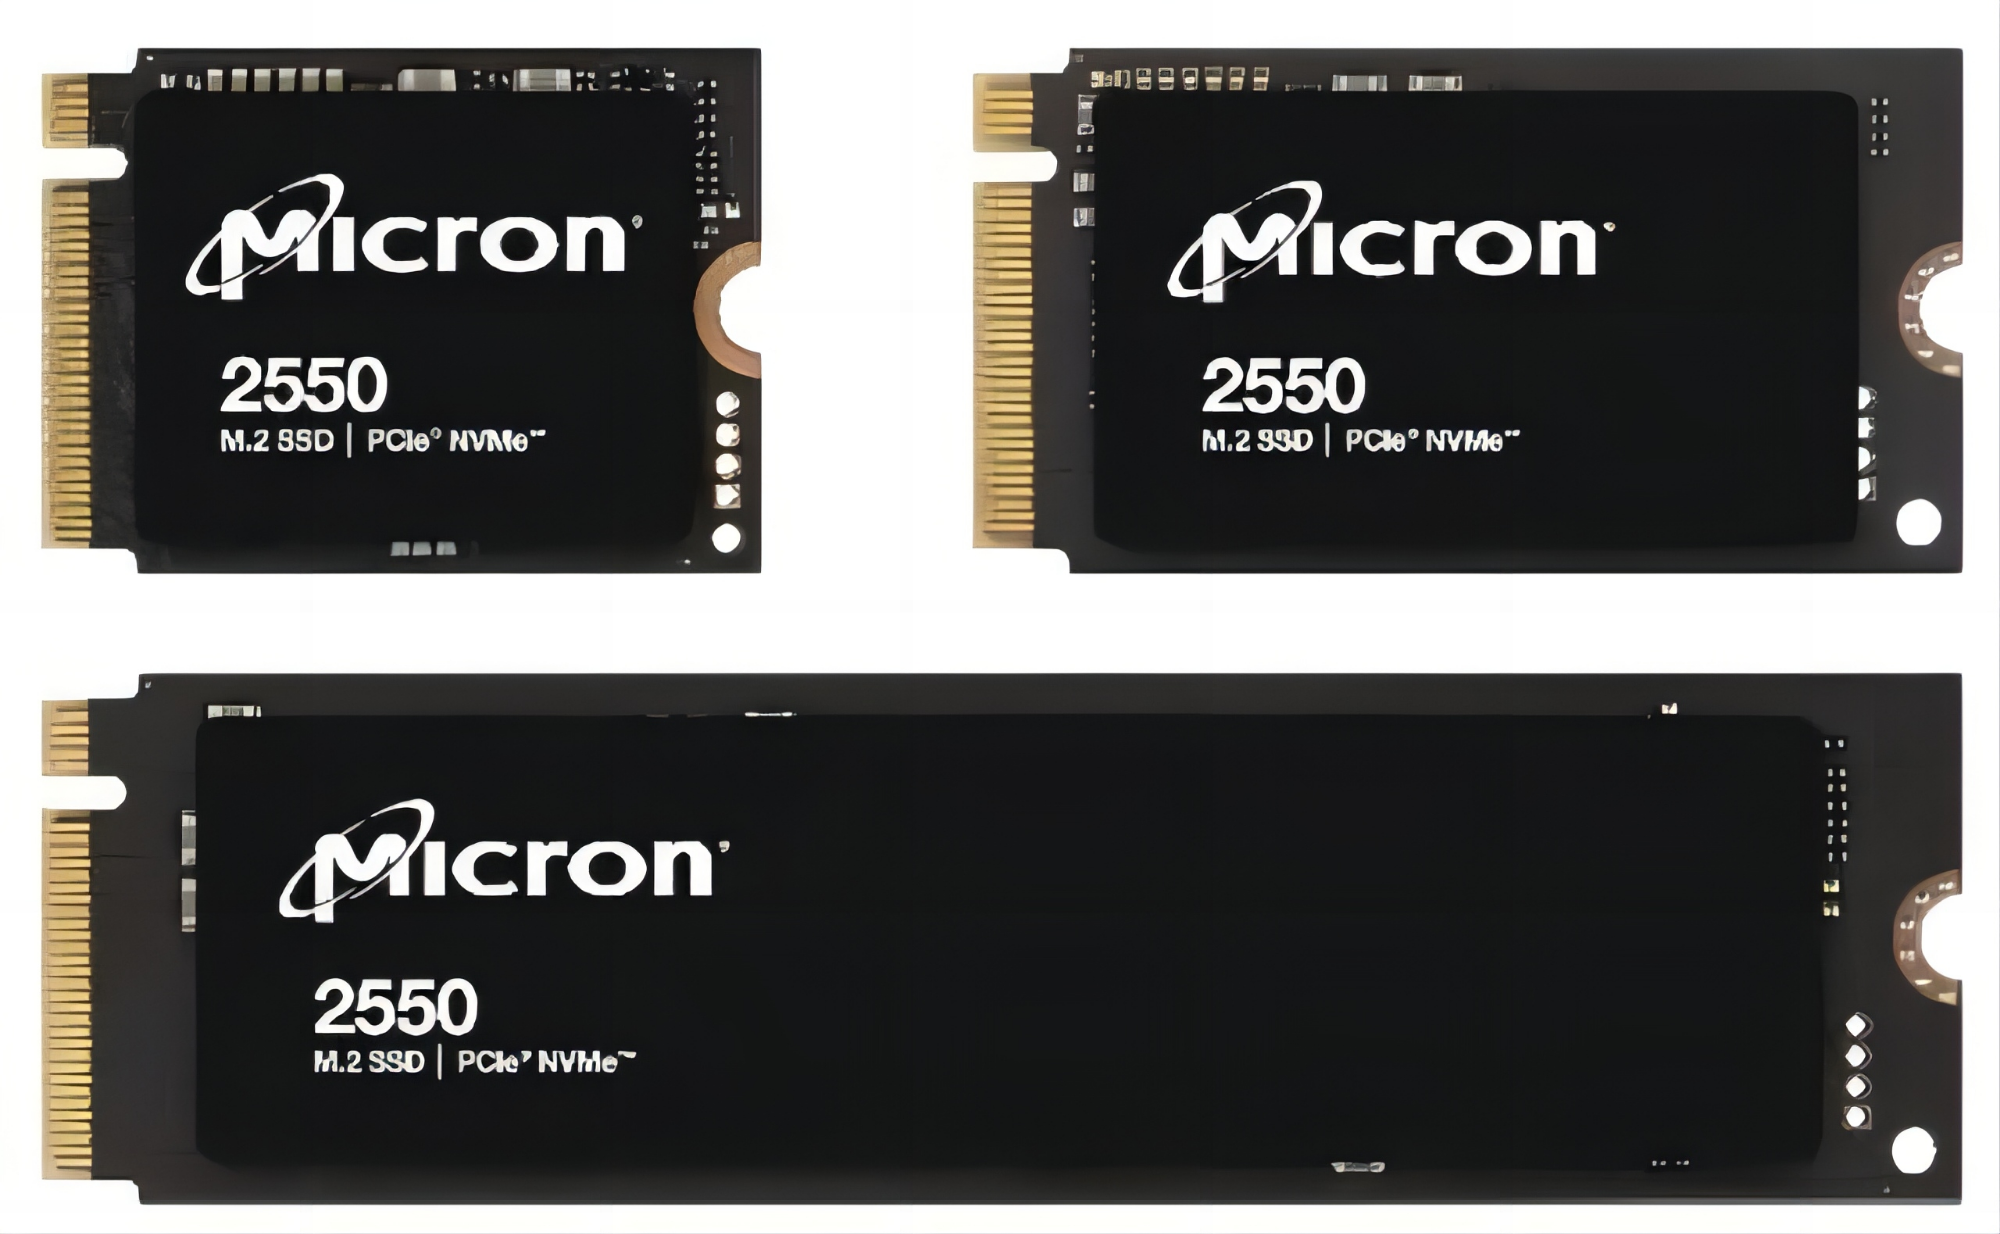 Micron 2550 SSD Specifications Announced: 232-Layer NAND, Read Speeds Up to 5000MB/s